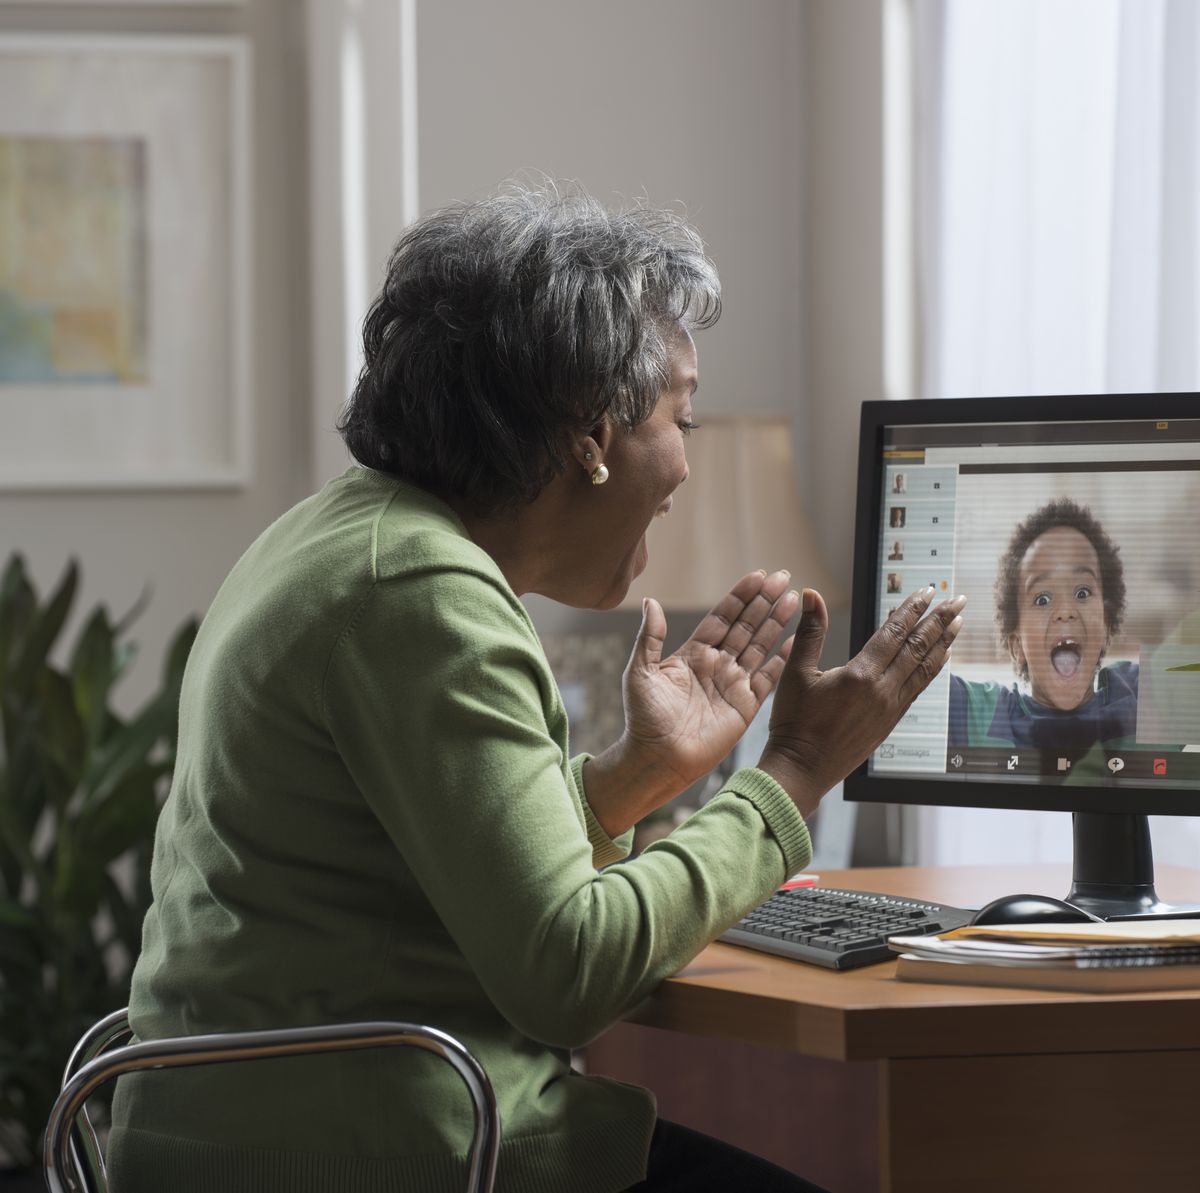 How to Use Online Games and Activities to Connect to Grandchildren - WSJ